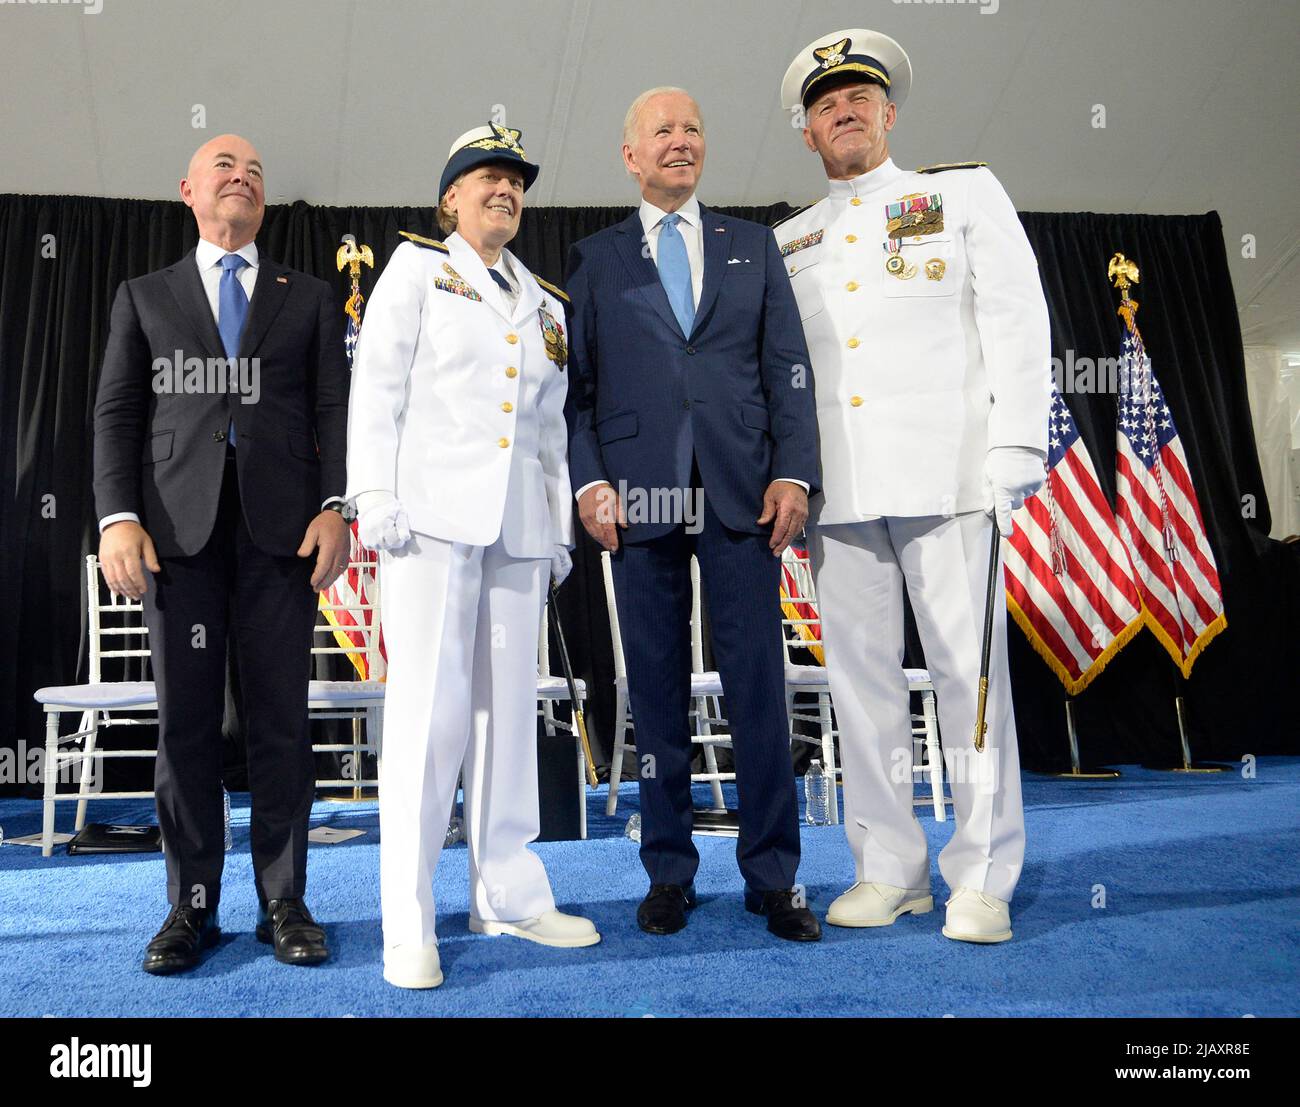 President Joe Biden (2nd R) and Homeland Security Secretary Alejandro Mayorkas (L) participate in a change of command ceremony with outgoing Commandant Adm. Karl L. Schultz and incoming Commandant Adm. Linda Fagan at U.S. Coast Guard Headquarters in Washington, DC on Wednesday, June 1, 2022. Photo by Bonnie Cash/Pool/ABACAPRESS.COM Stock Photo